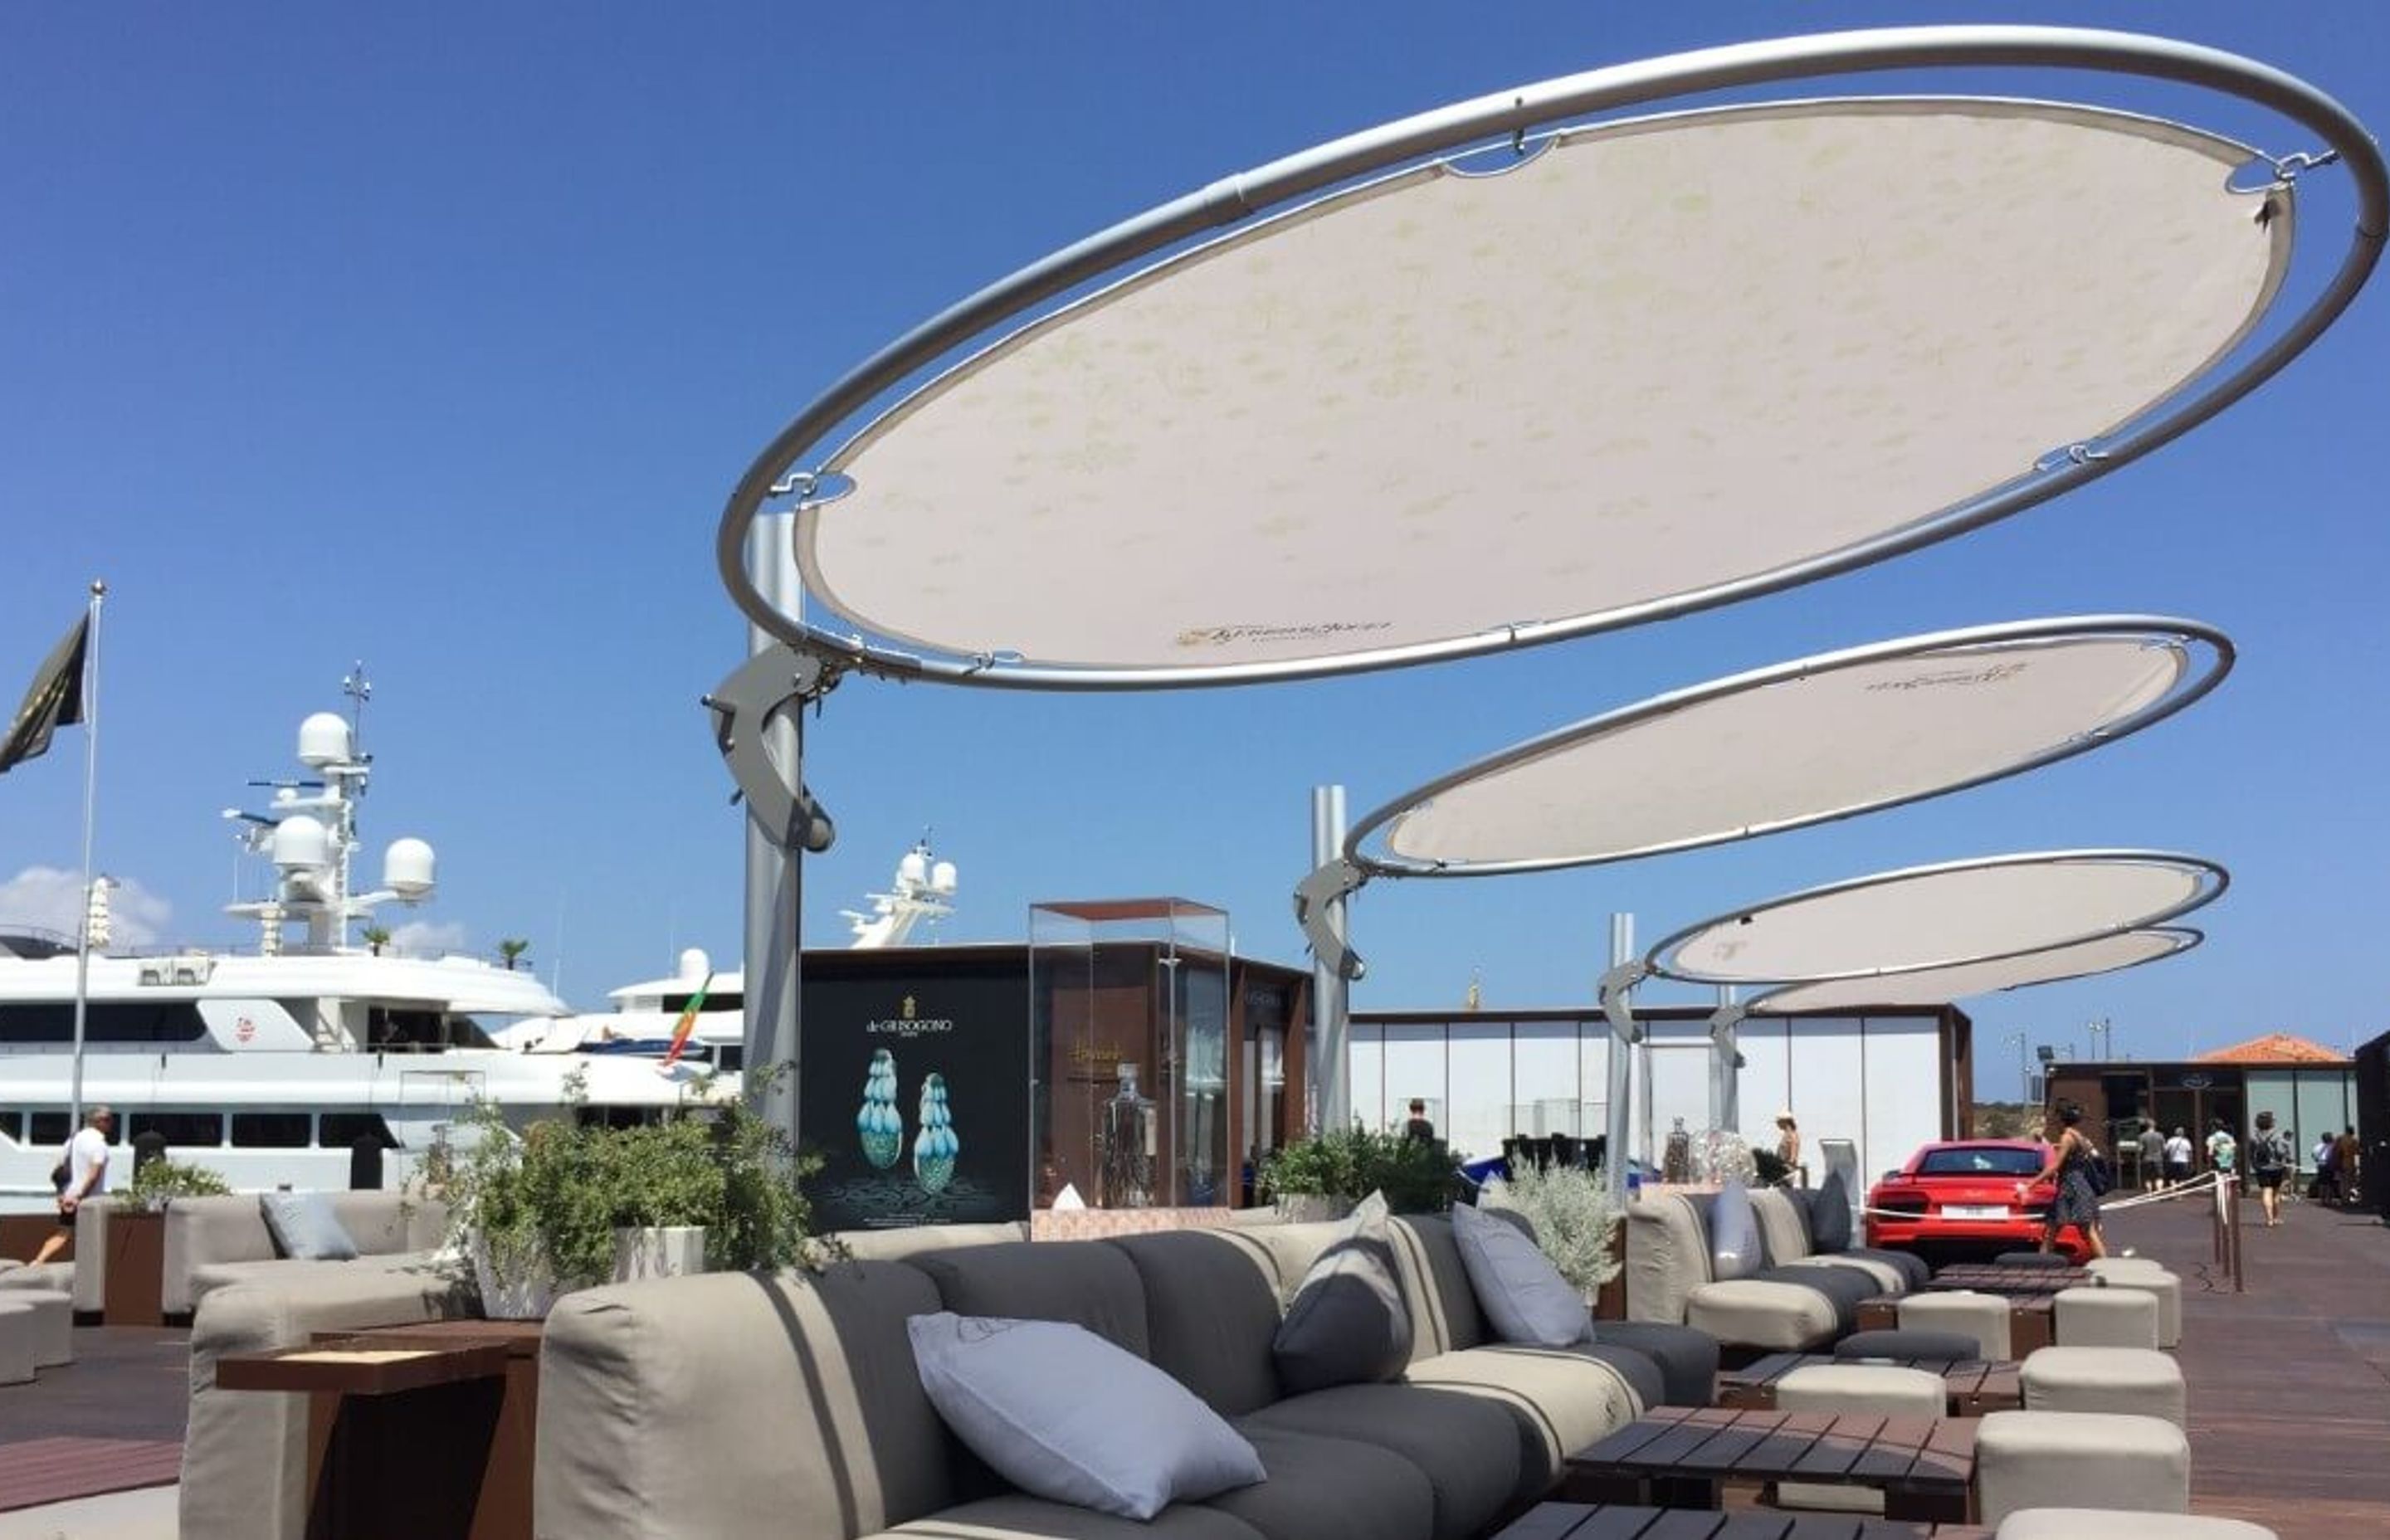 Constructed from marine-grade aluminium, the Eclipsum features a 3-metre canopy, which, along with the mast, is rotational through a full 360 degrees.